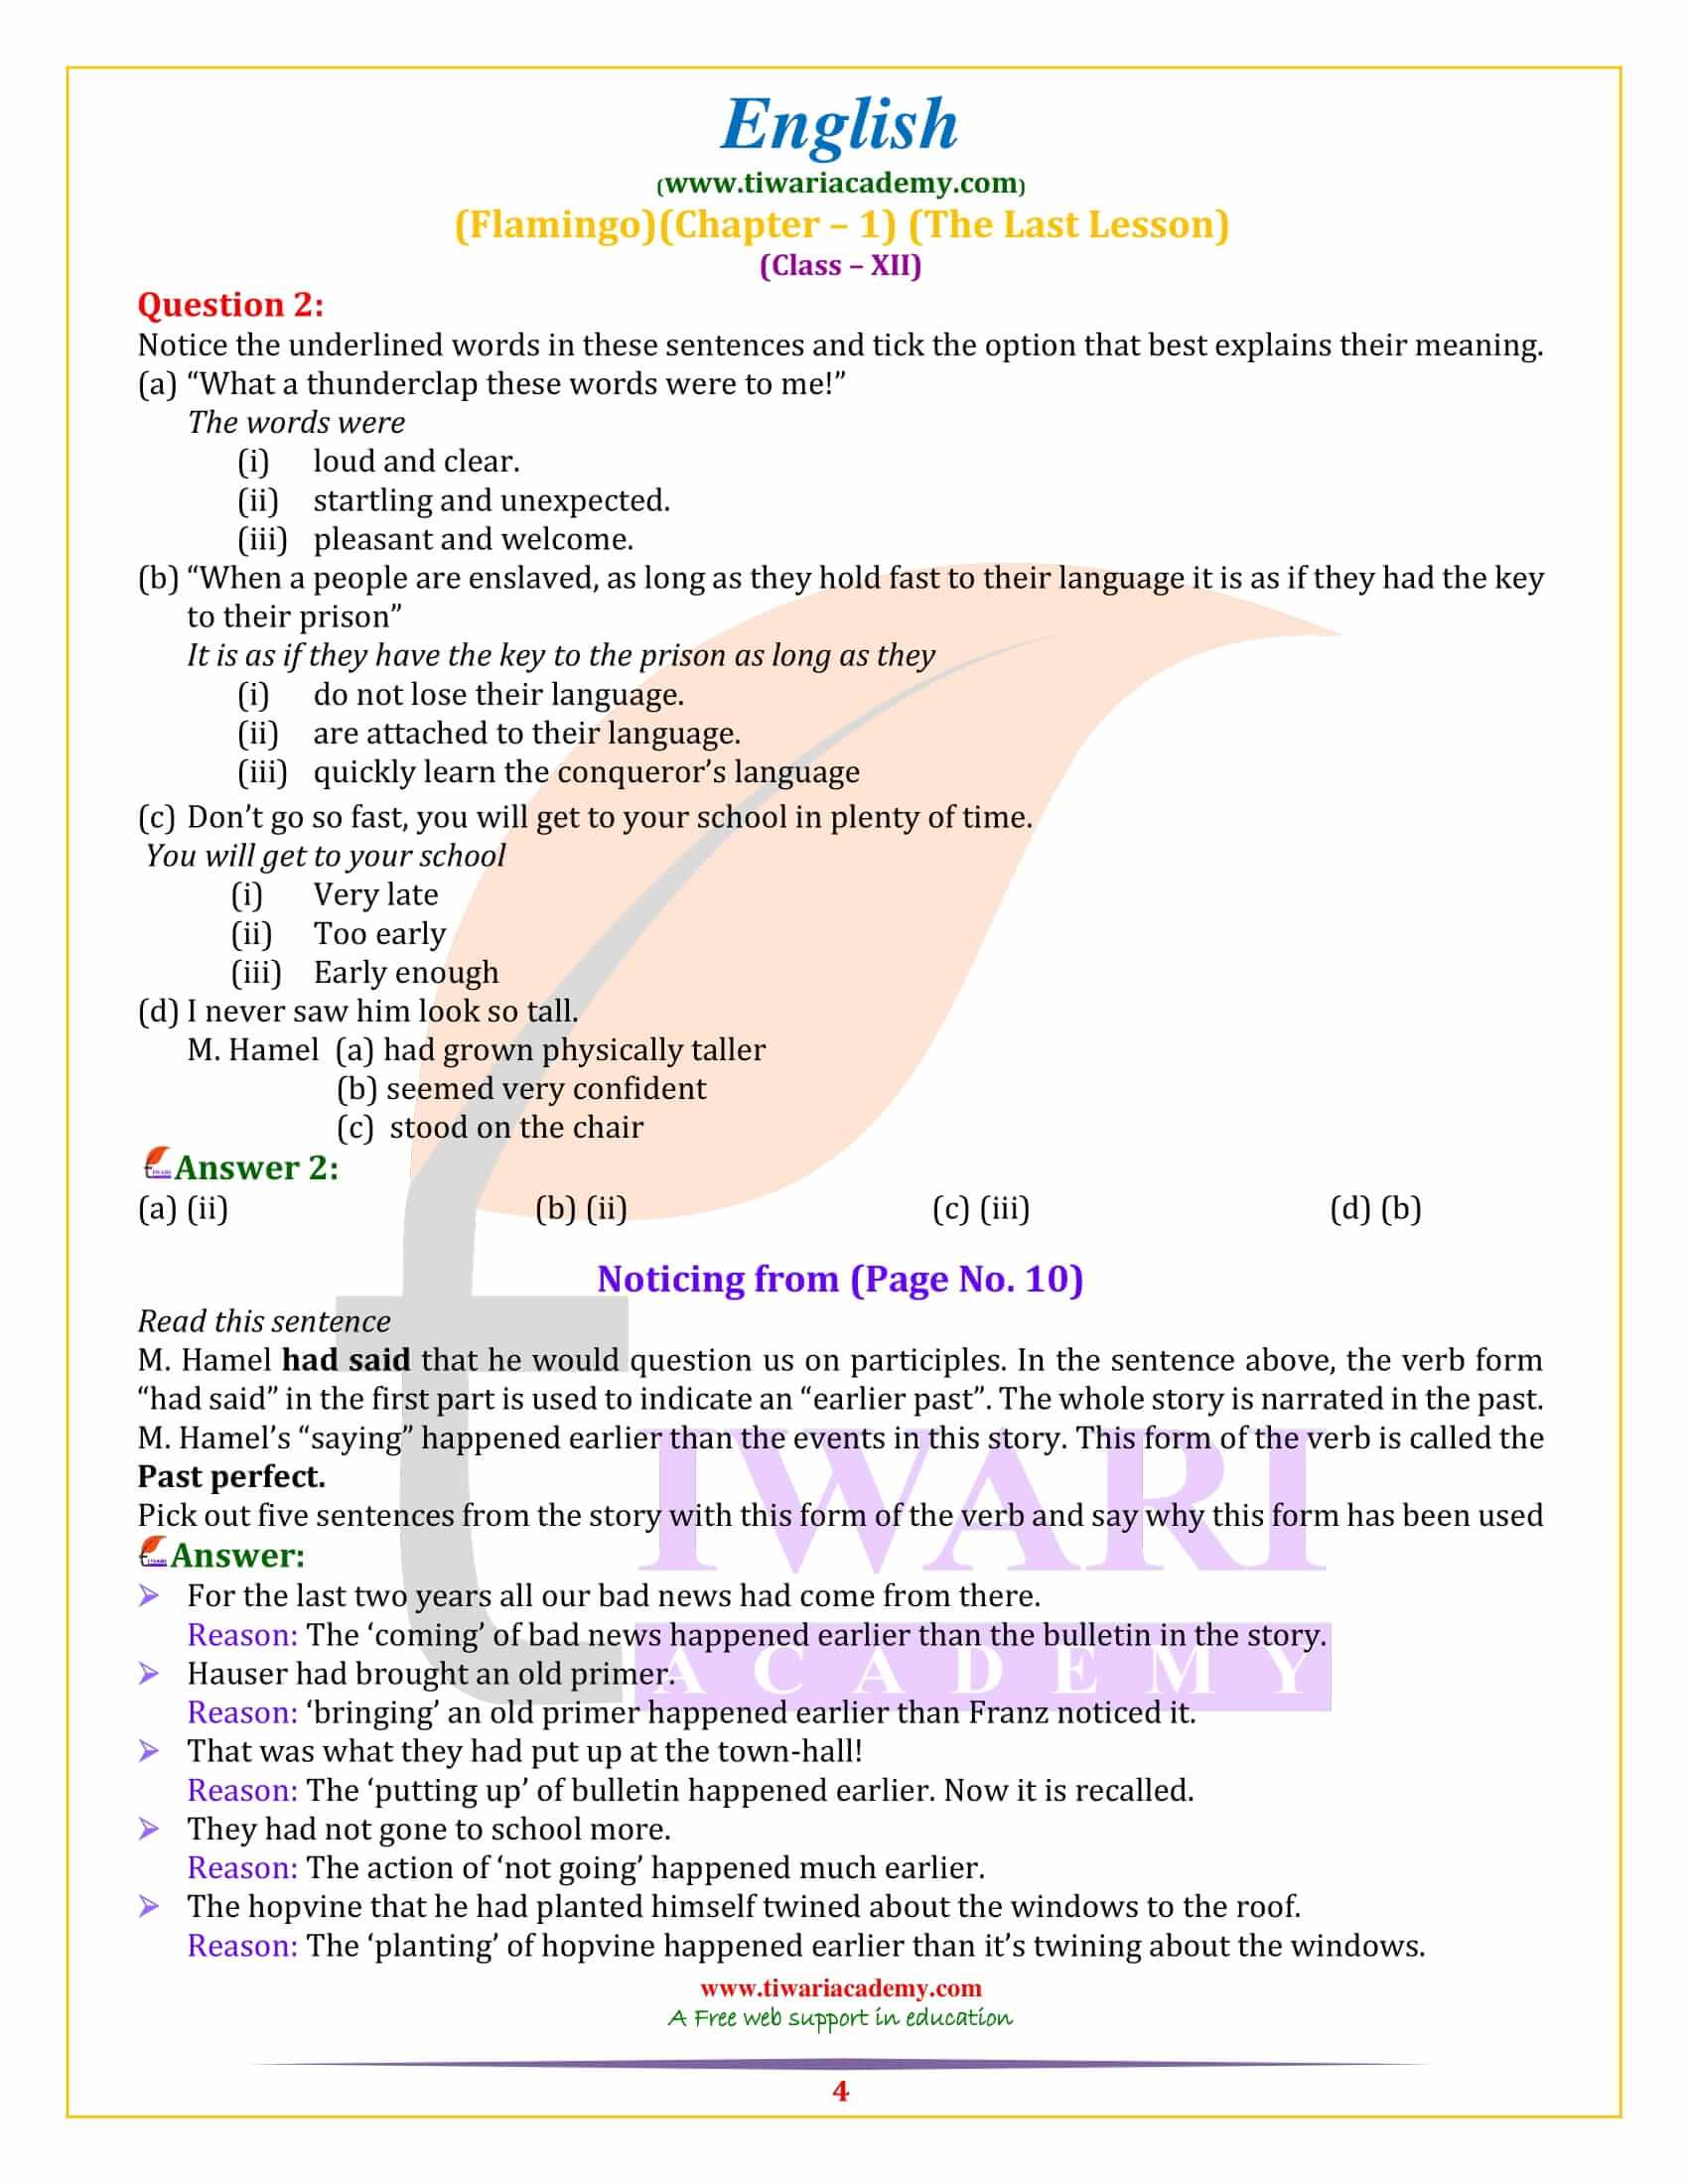 NCERT Solutions for Class 12 English Flamingo Chapter 1